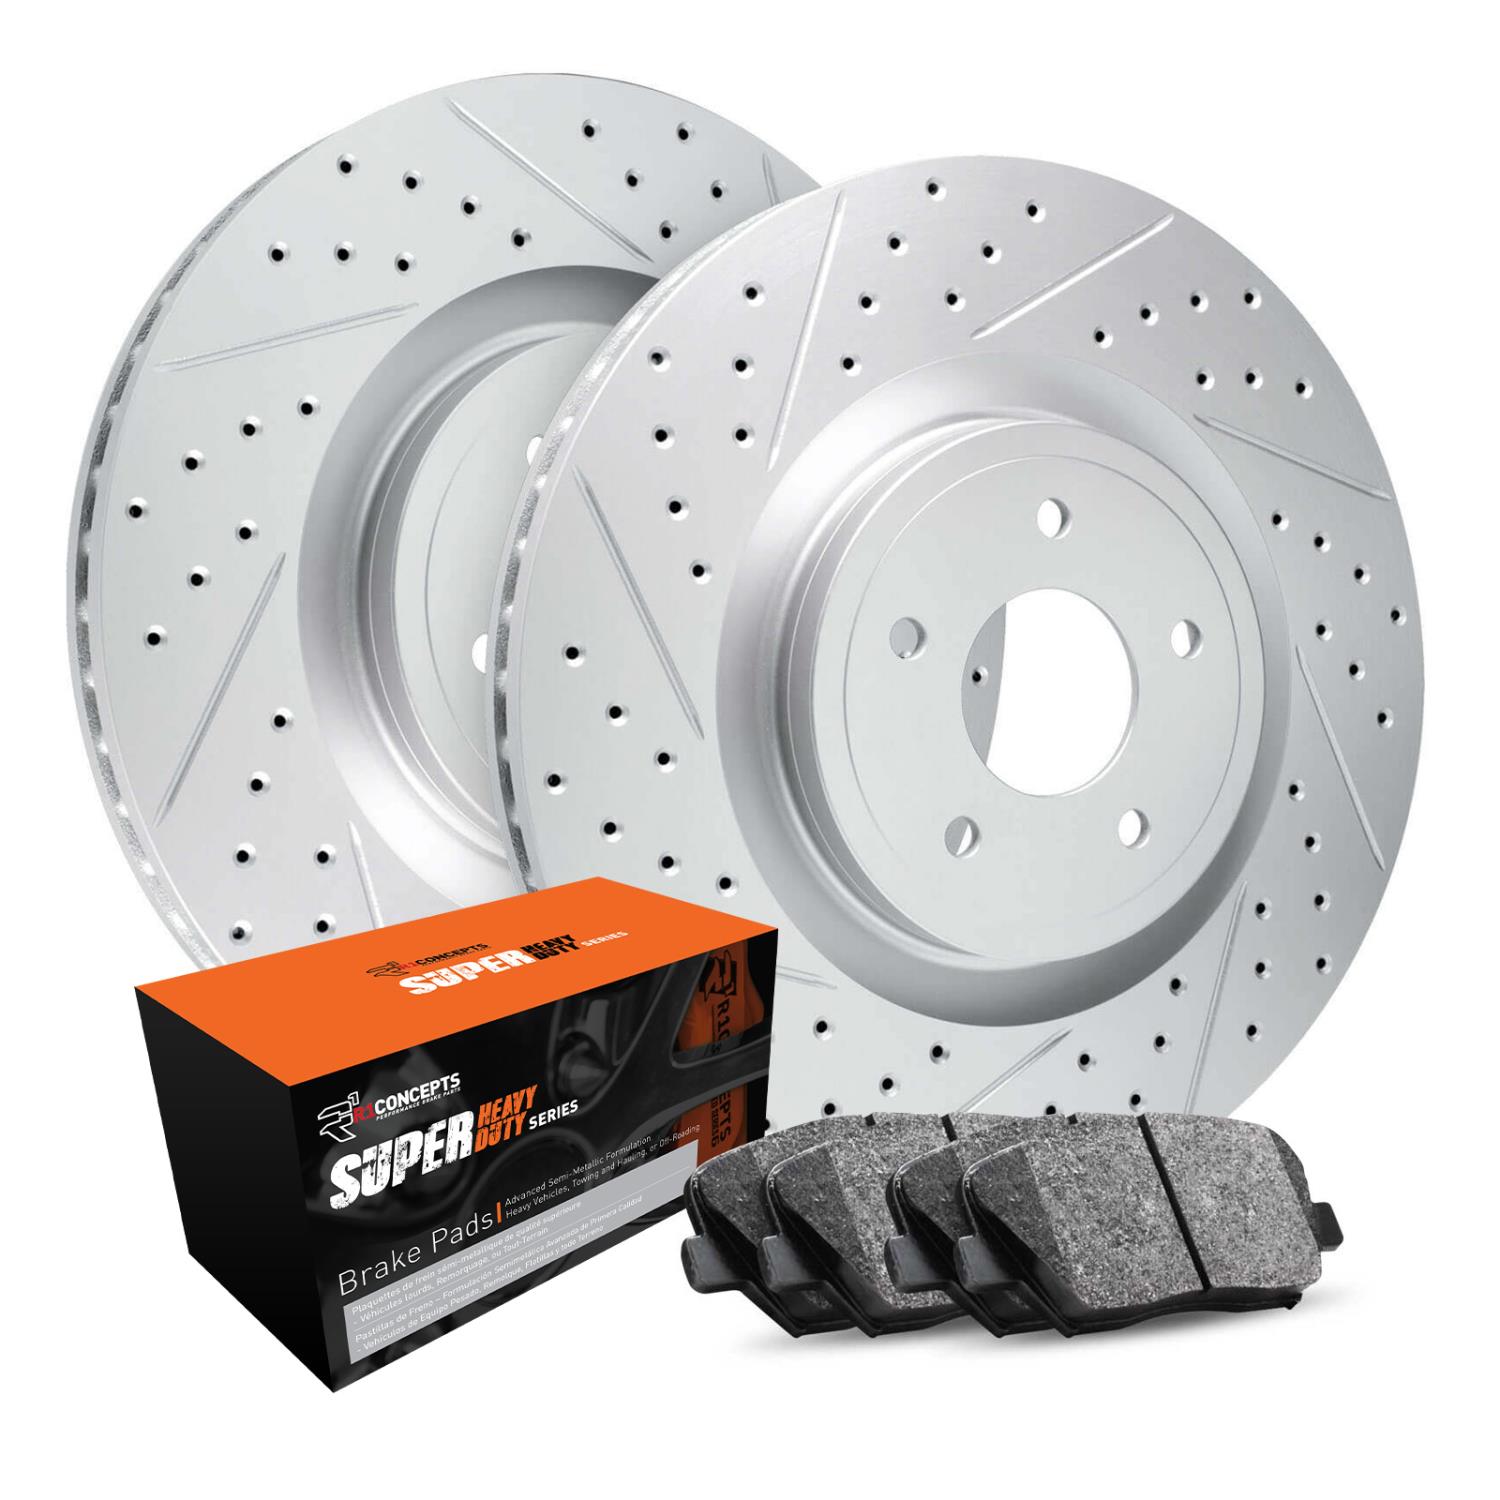 GEO-Carbon Drilled & Slotted Brake Rotor Set w/Super-Duty Pads, 2007-2017 Fits Multiple Makes/Models, Position: Rear